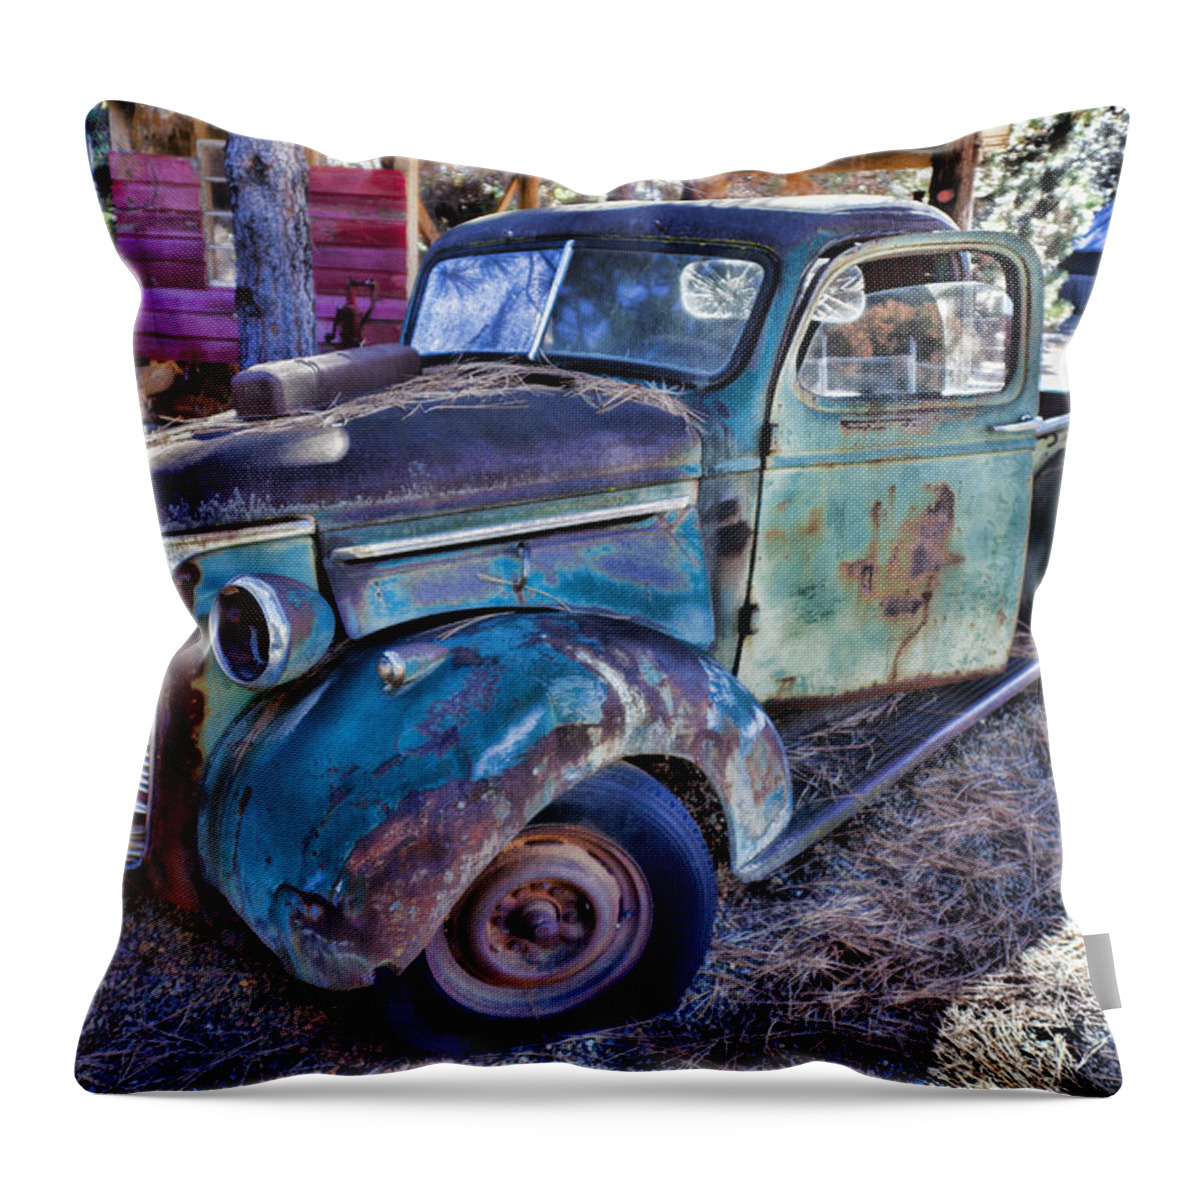  Truck Throw Pillow featuring the photograph My old truck by Garry Gay